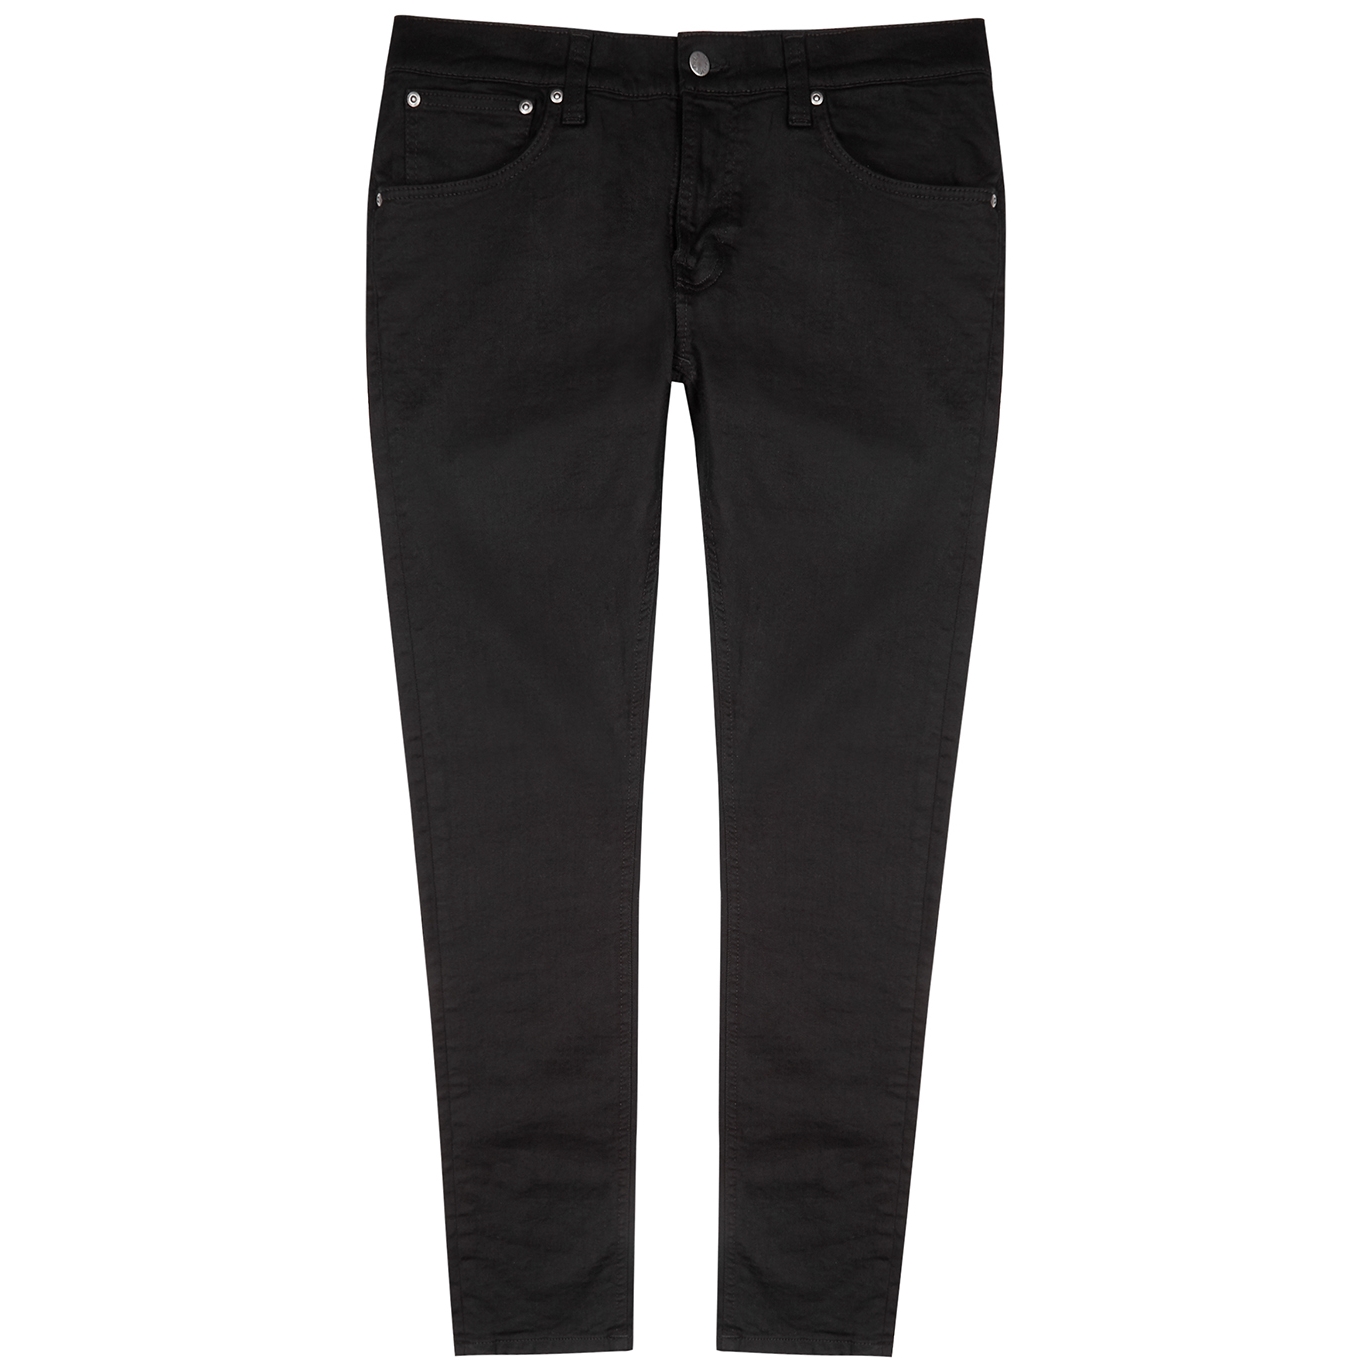 Tight Terry Black Skinny Jeans